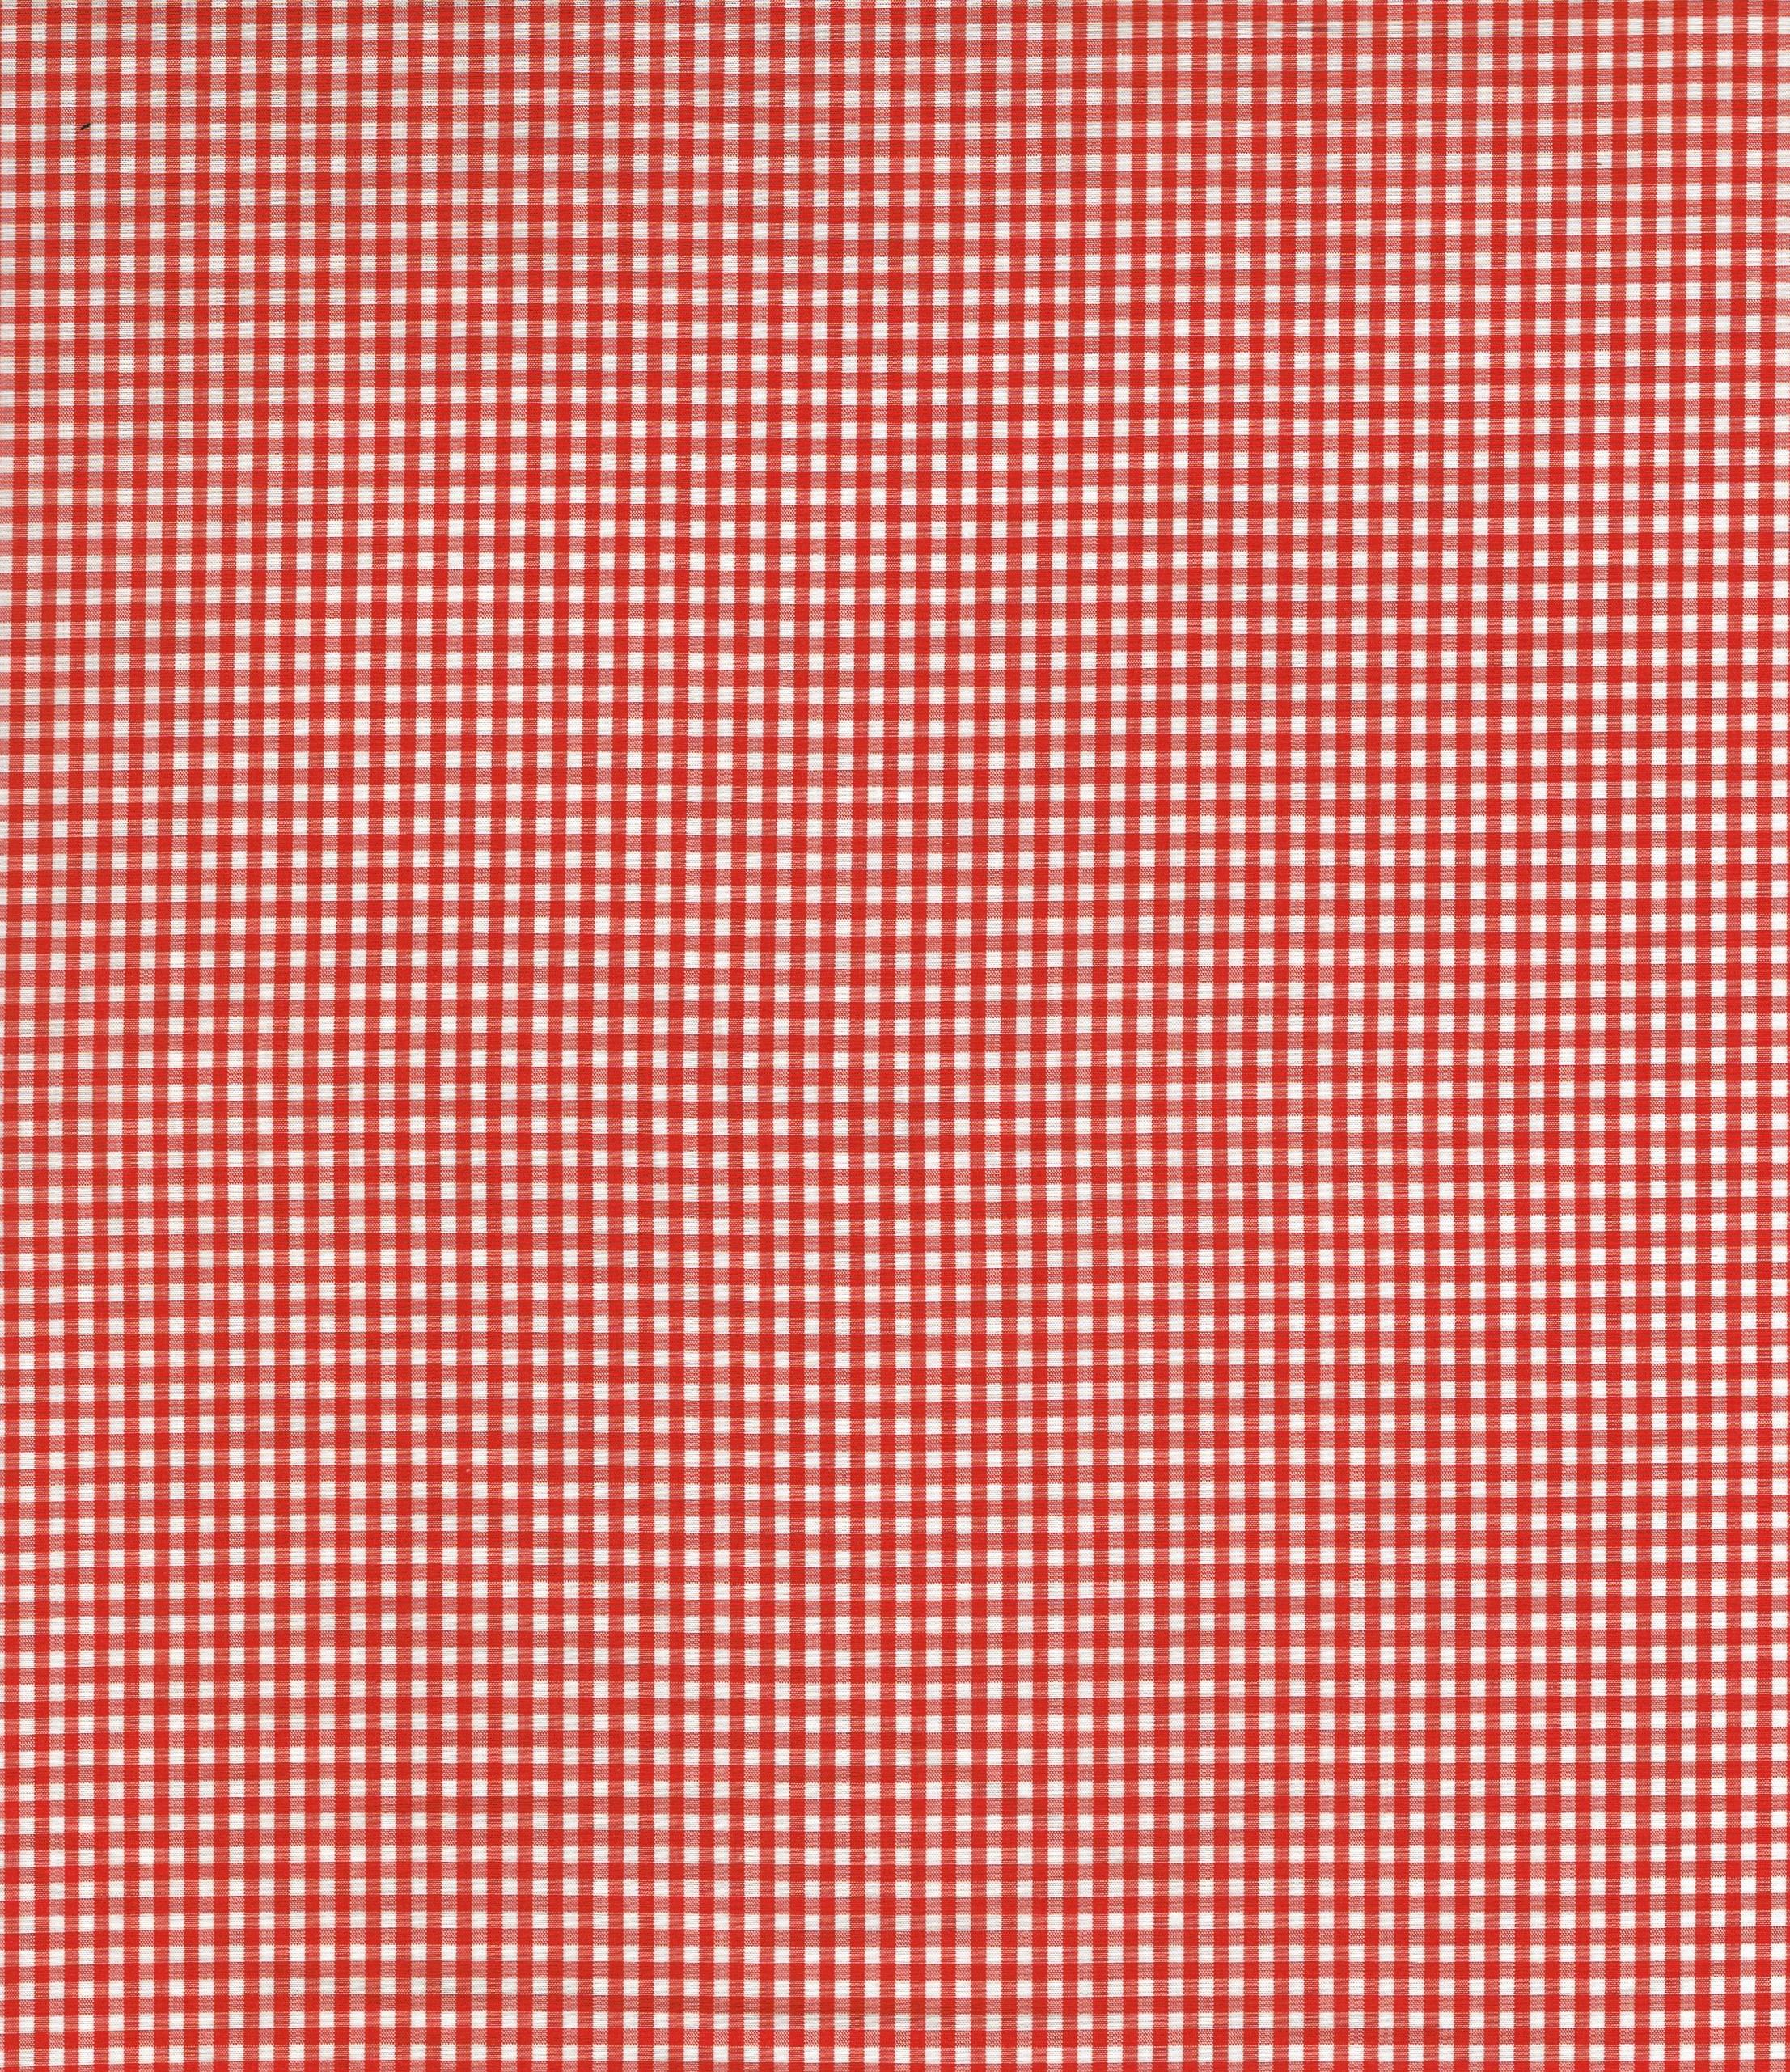 View GINGHAM CHECK RED